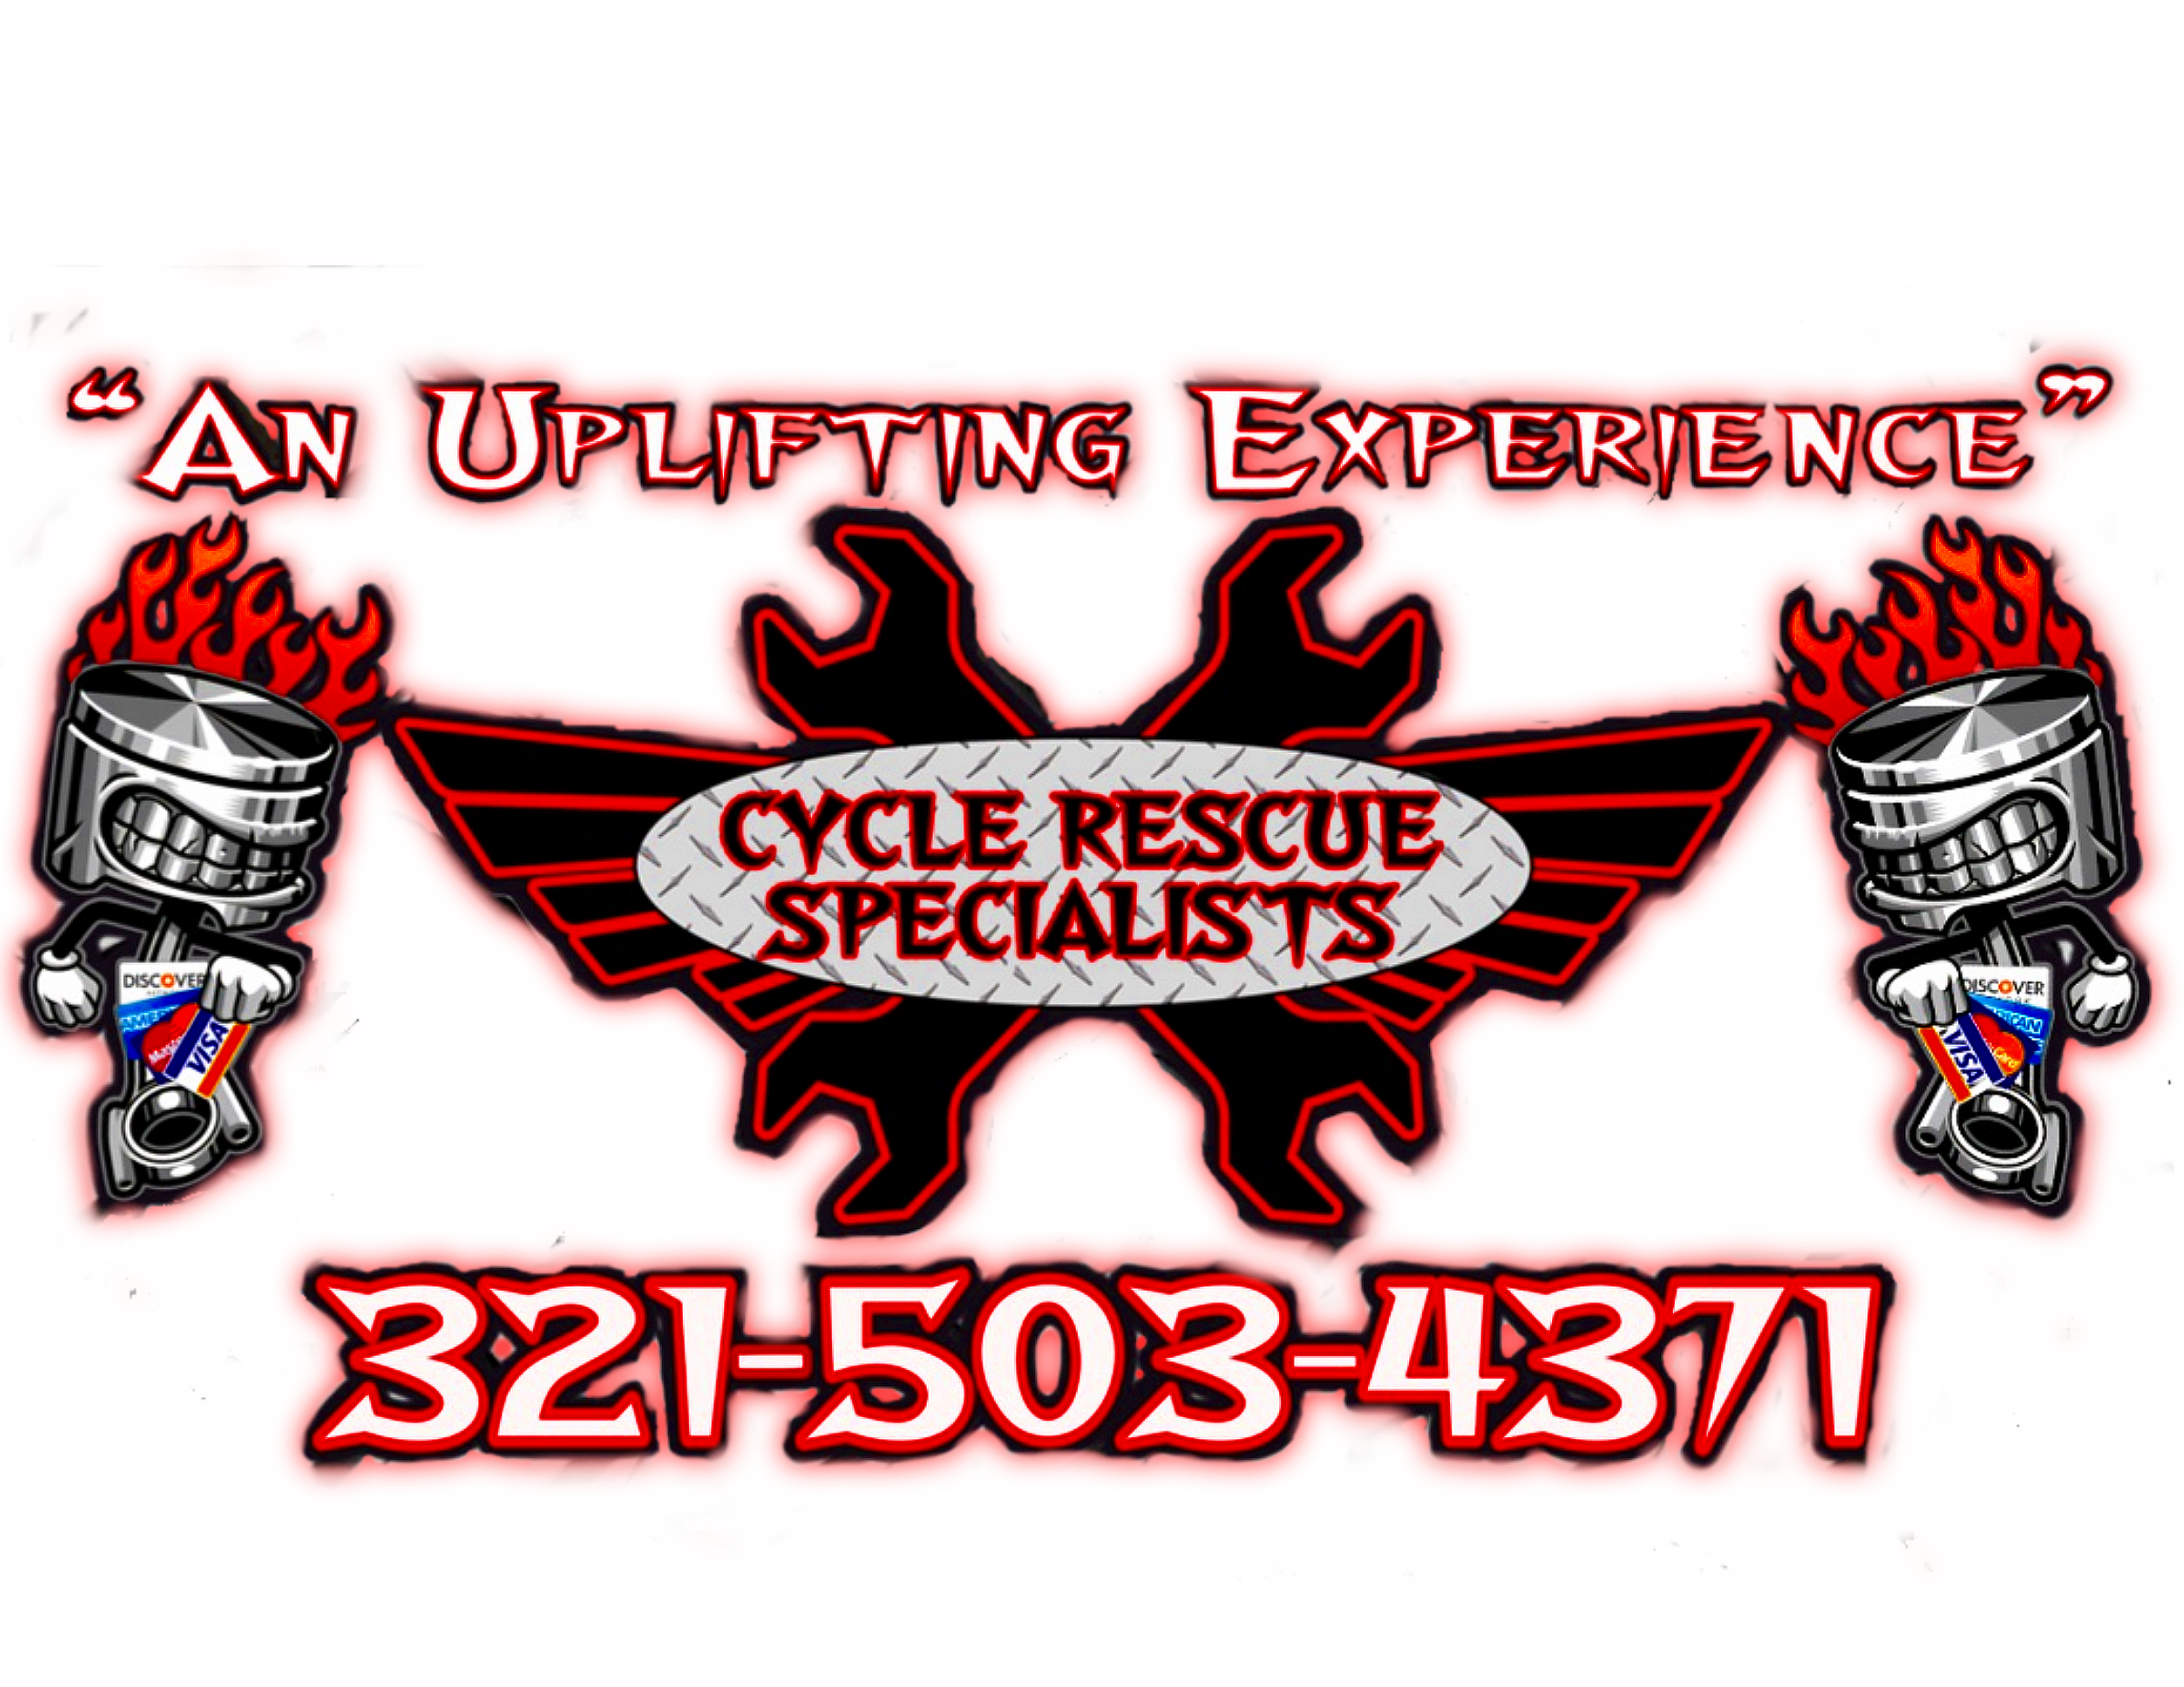 Cycle Rescue Specialists